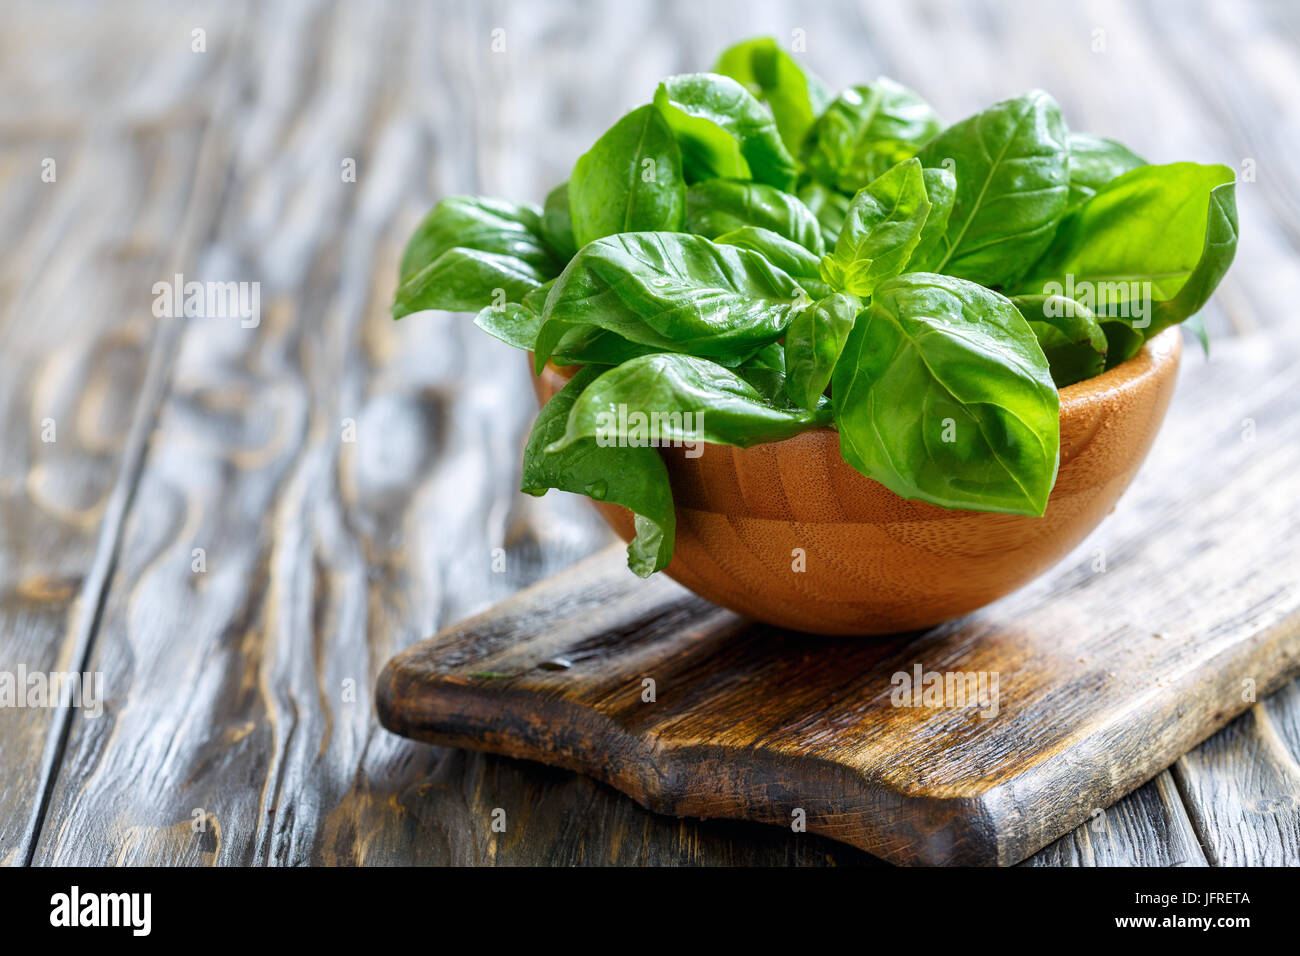 Green basil leaves in a drop of water. Stock Photo